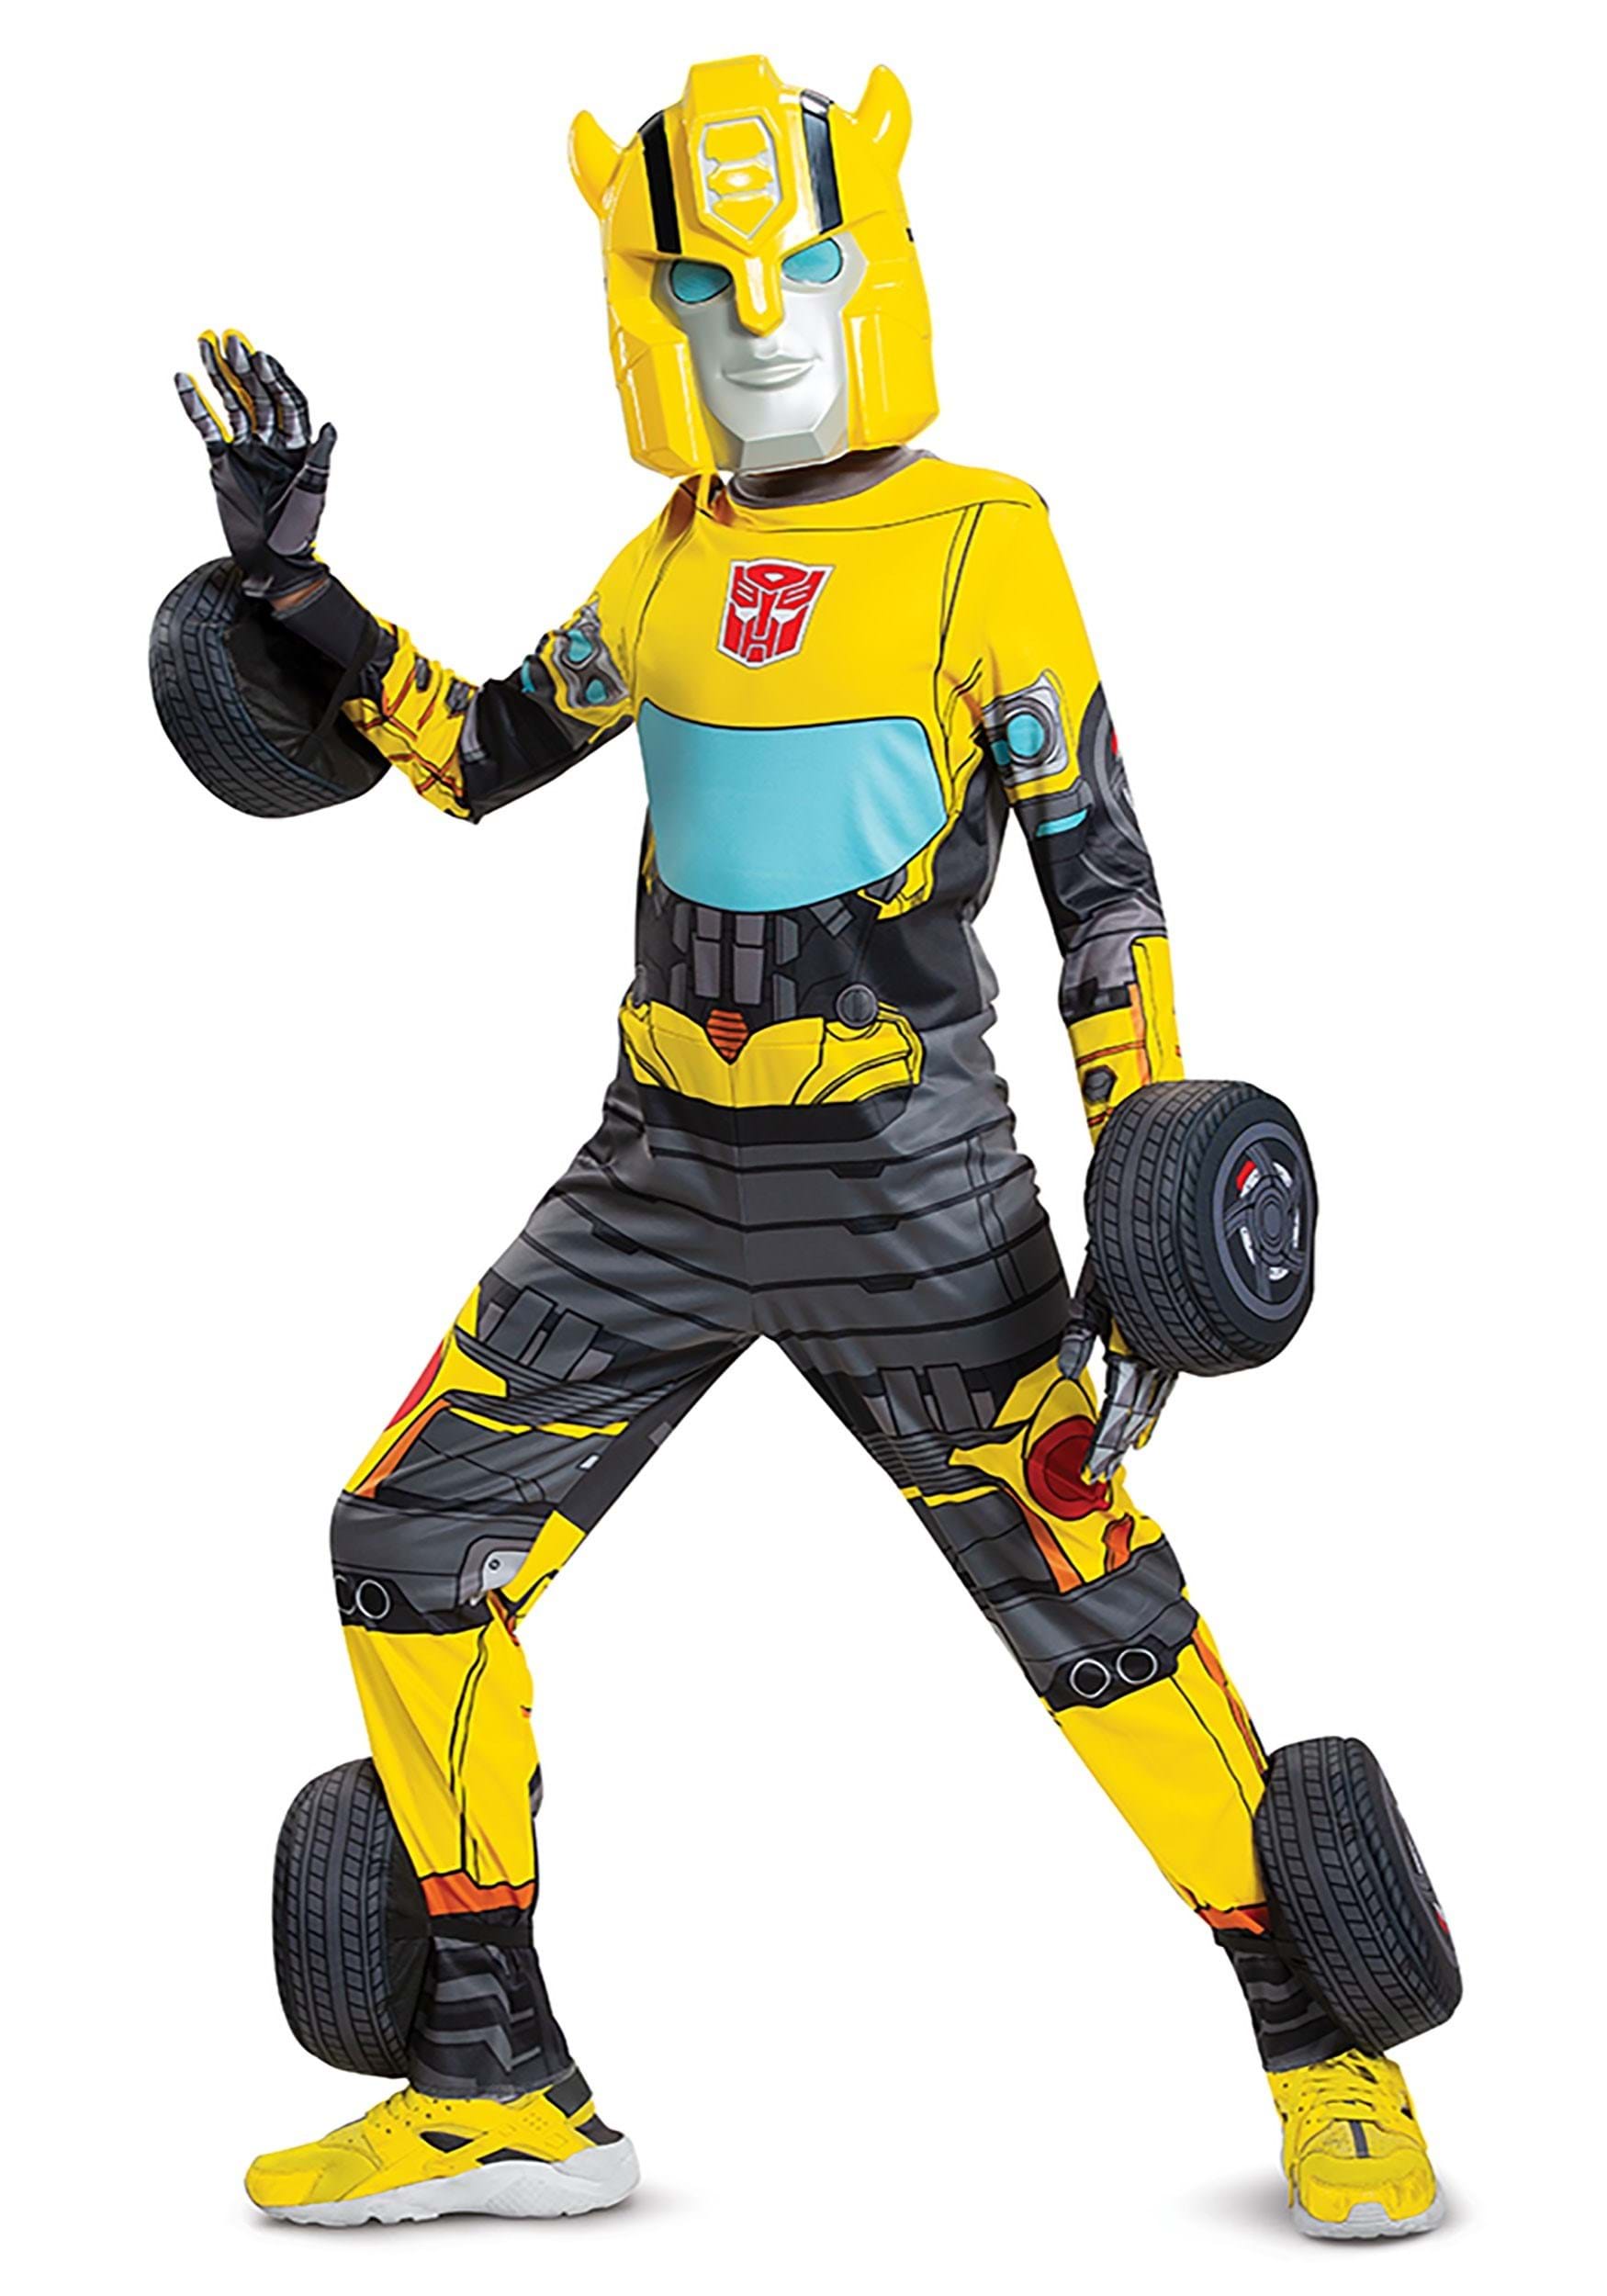 Photos - Fancy Dress Disguise Converting Bumblebee Transformers Costume for Kids Gray/Yello